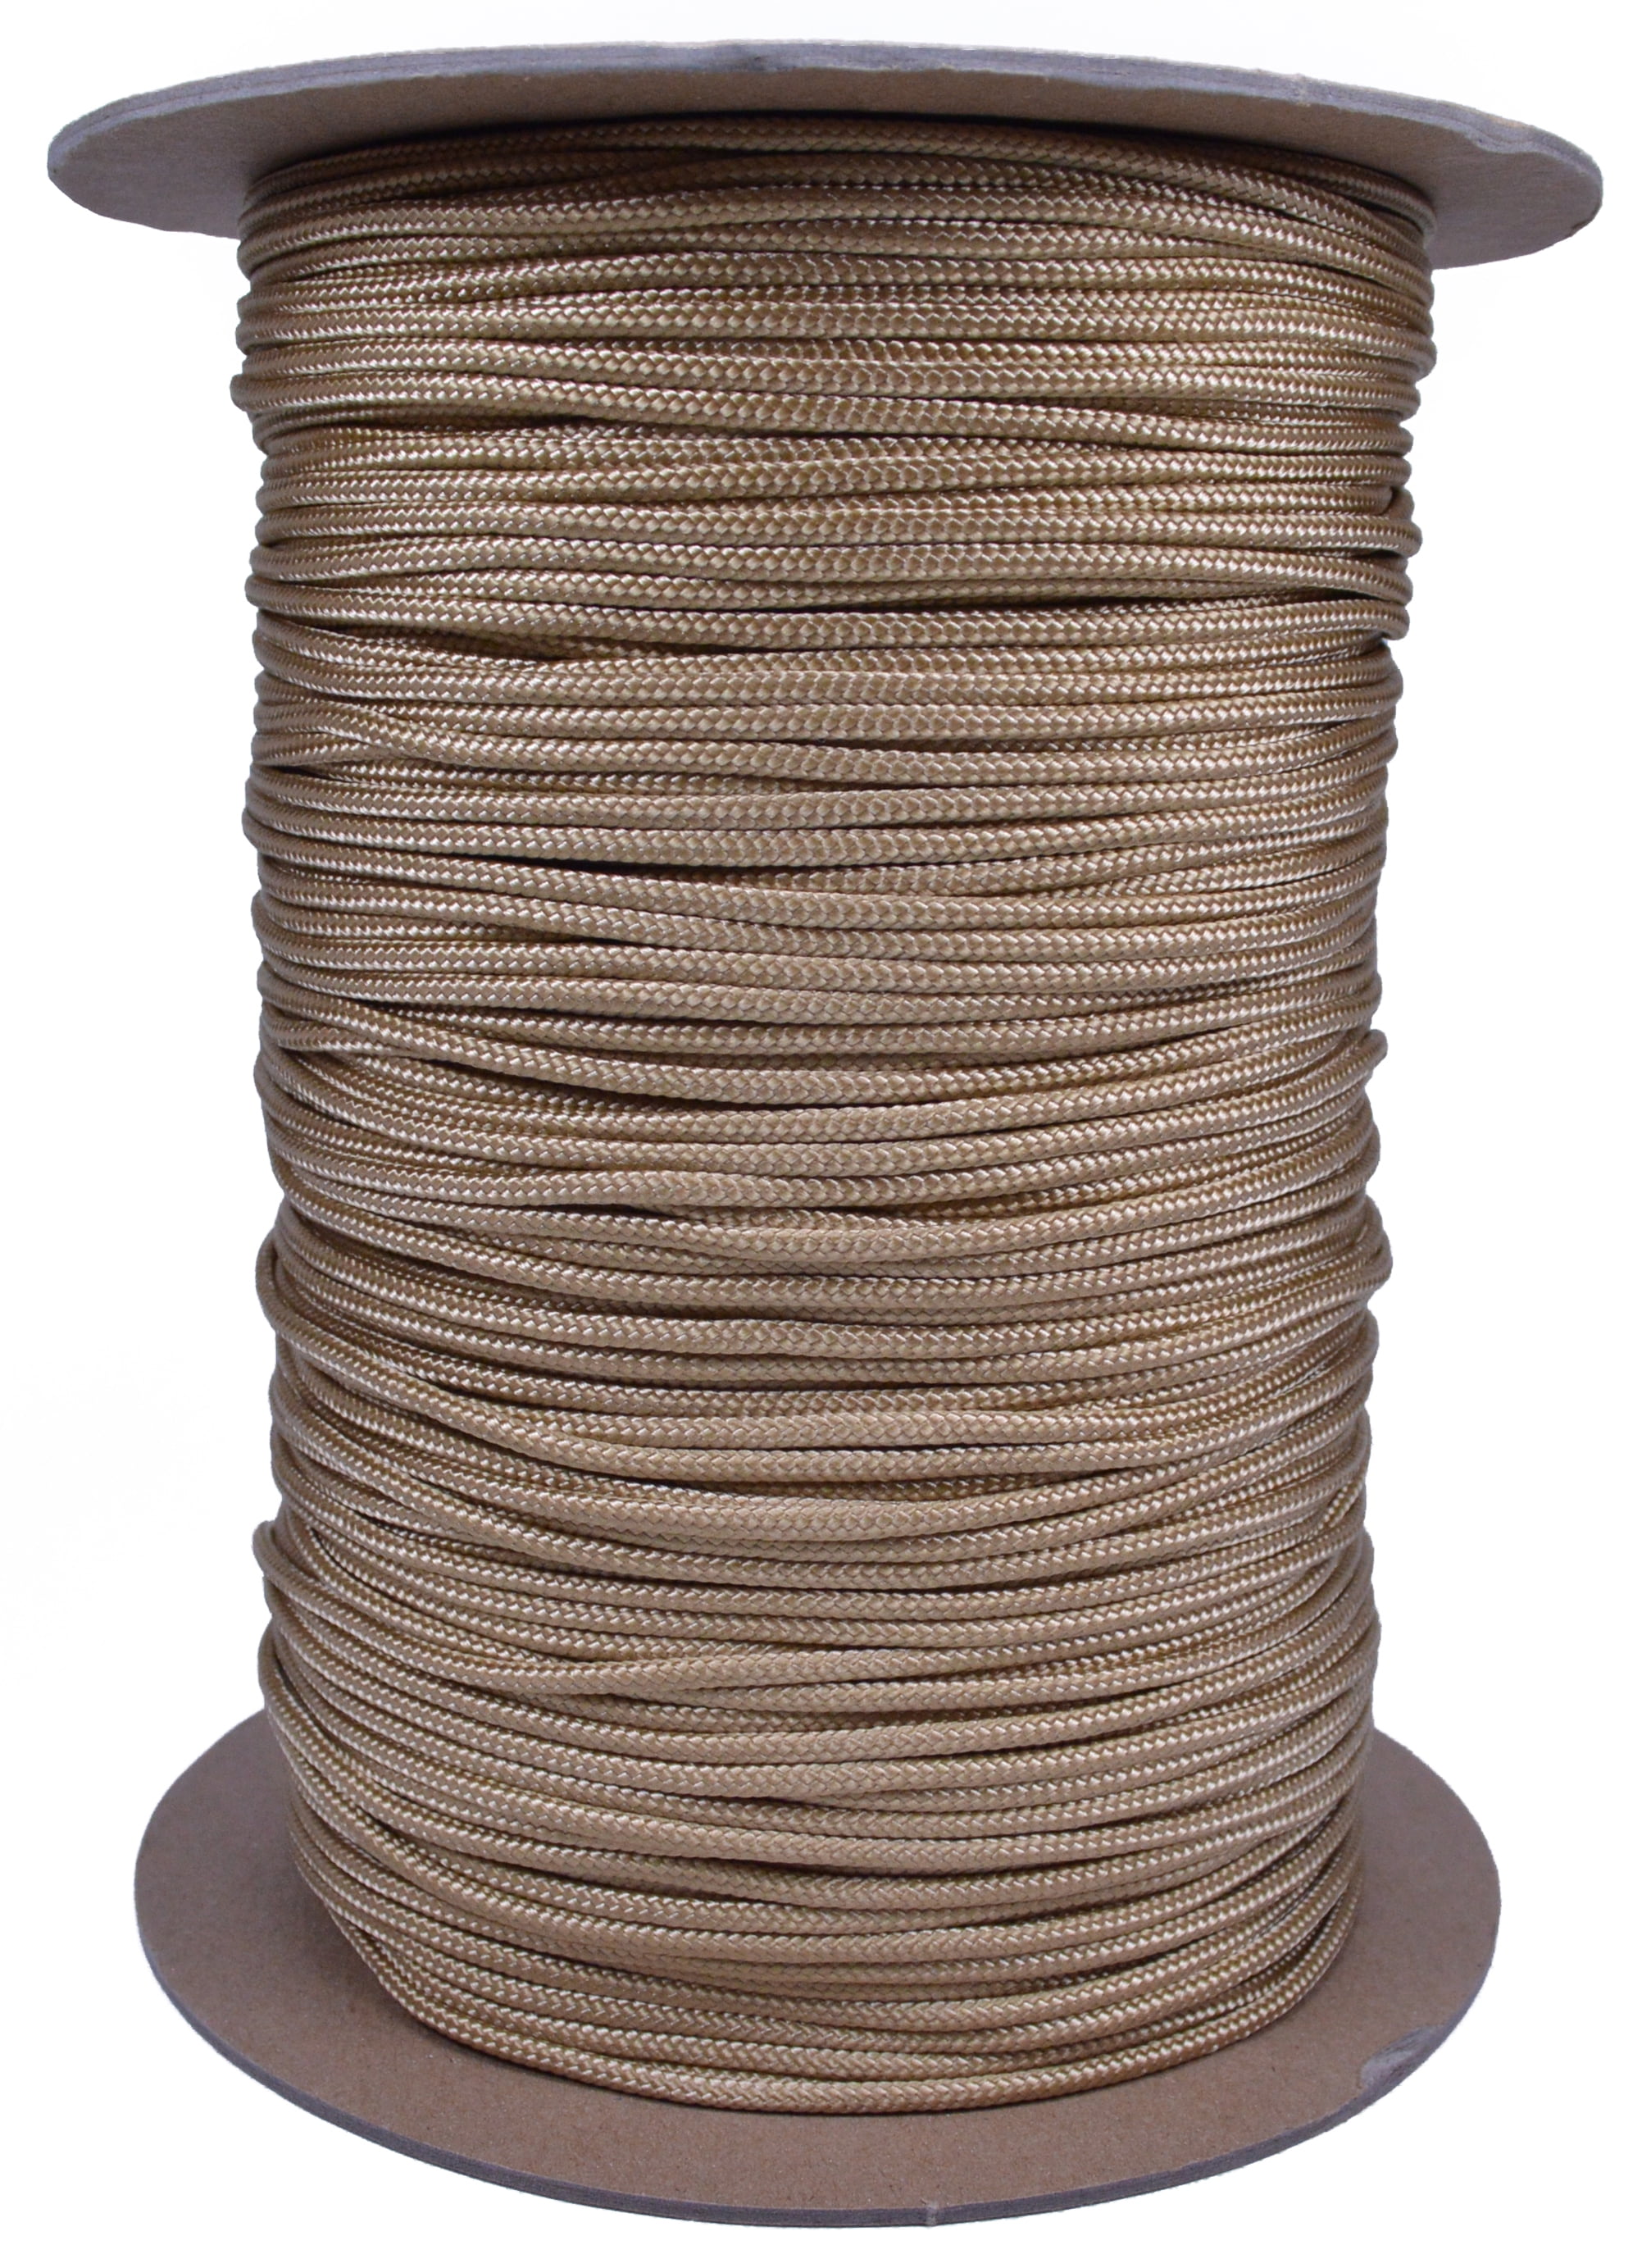 Moss 325 Cord 3 Strand Paracord - 1000 Foot Spool 